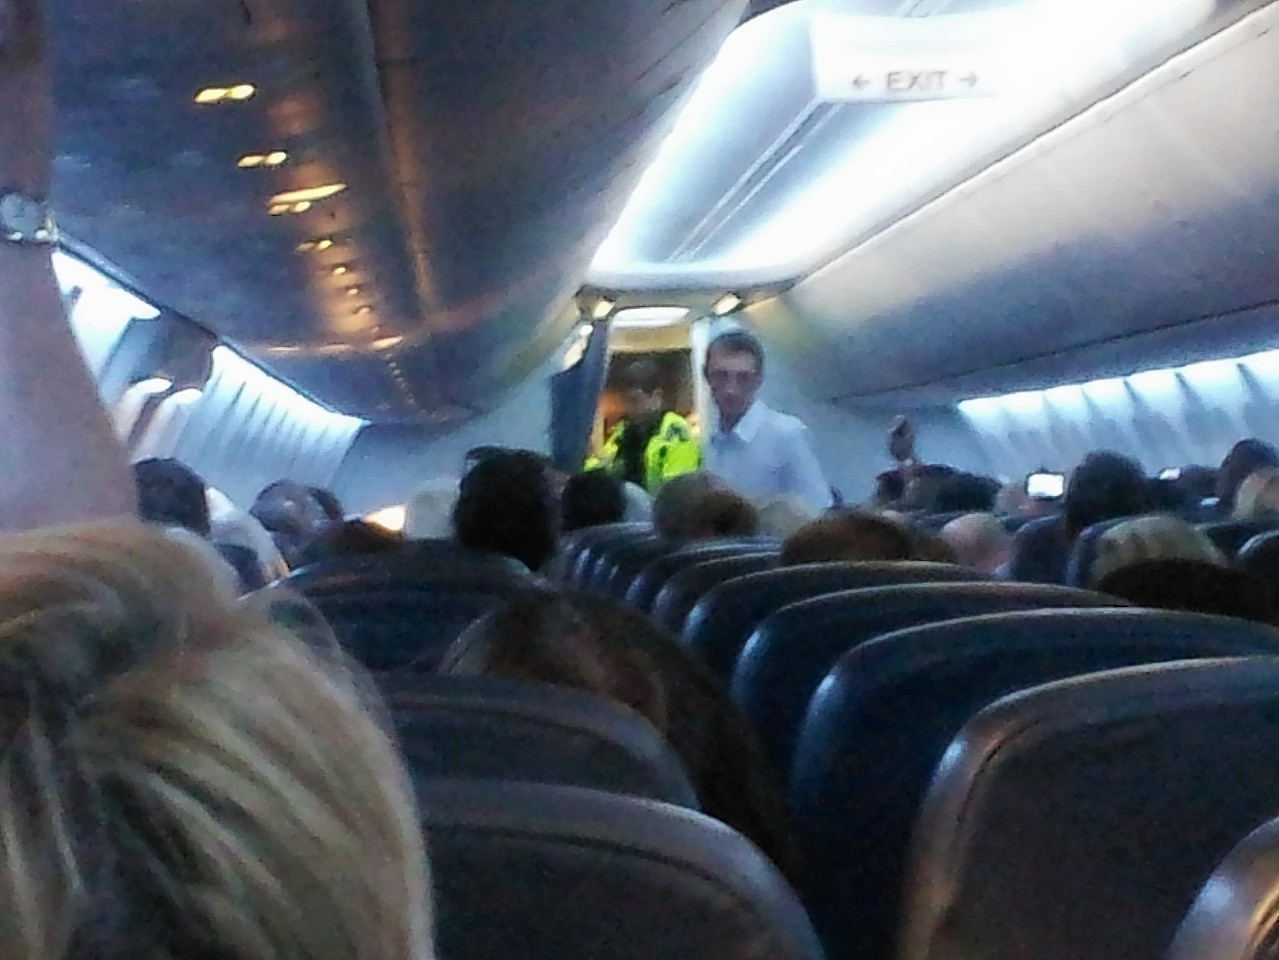 Police enter the aircraft after it was diverted to London